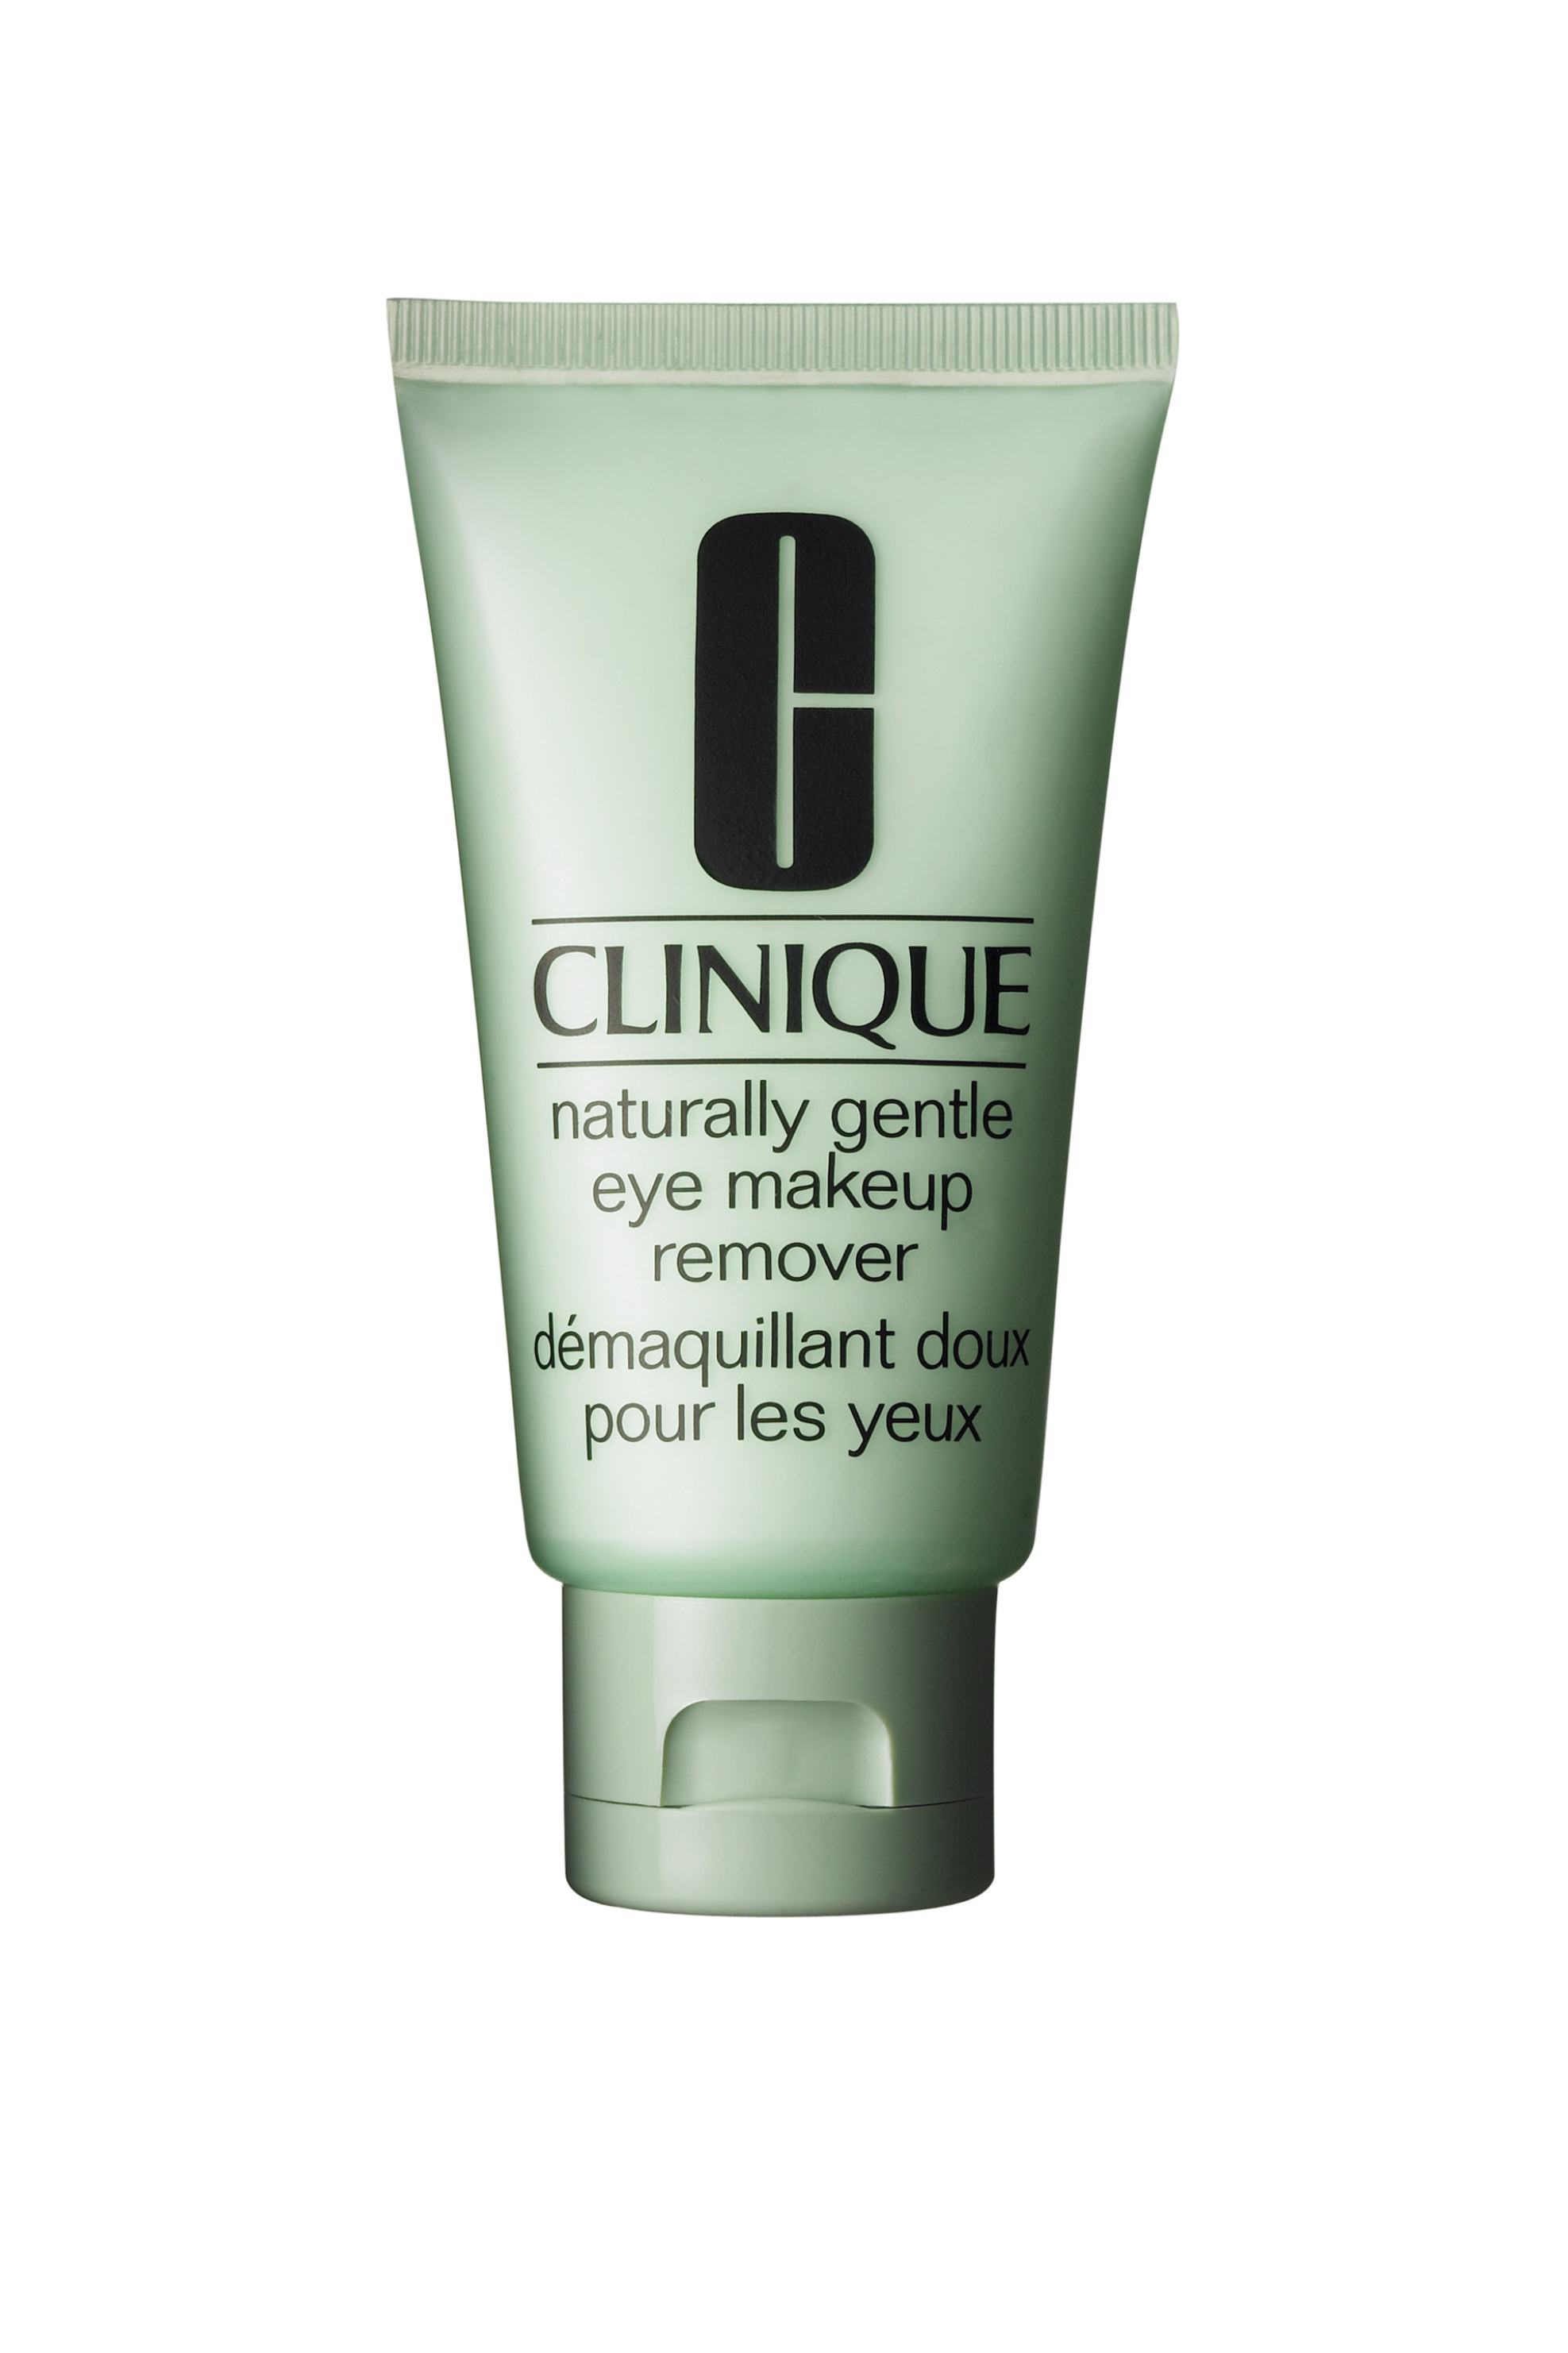 Clinique Naturally Gentle Eye Makeup Remover 75 ml - 68F3010000 980207500119